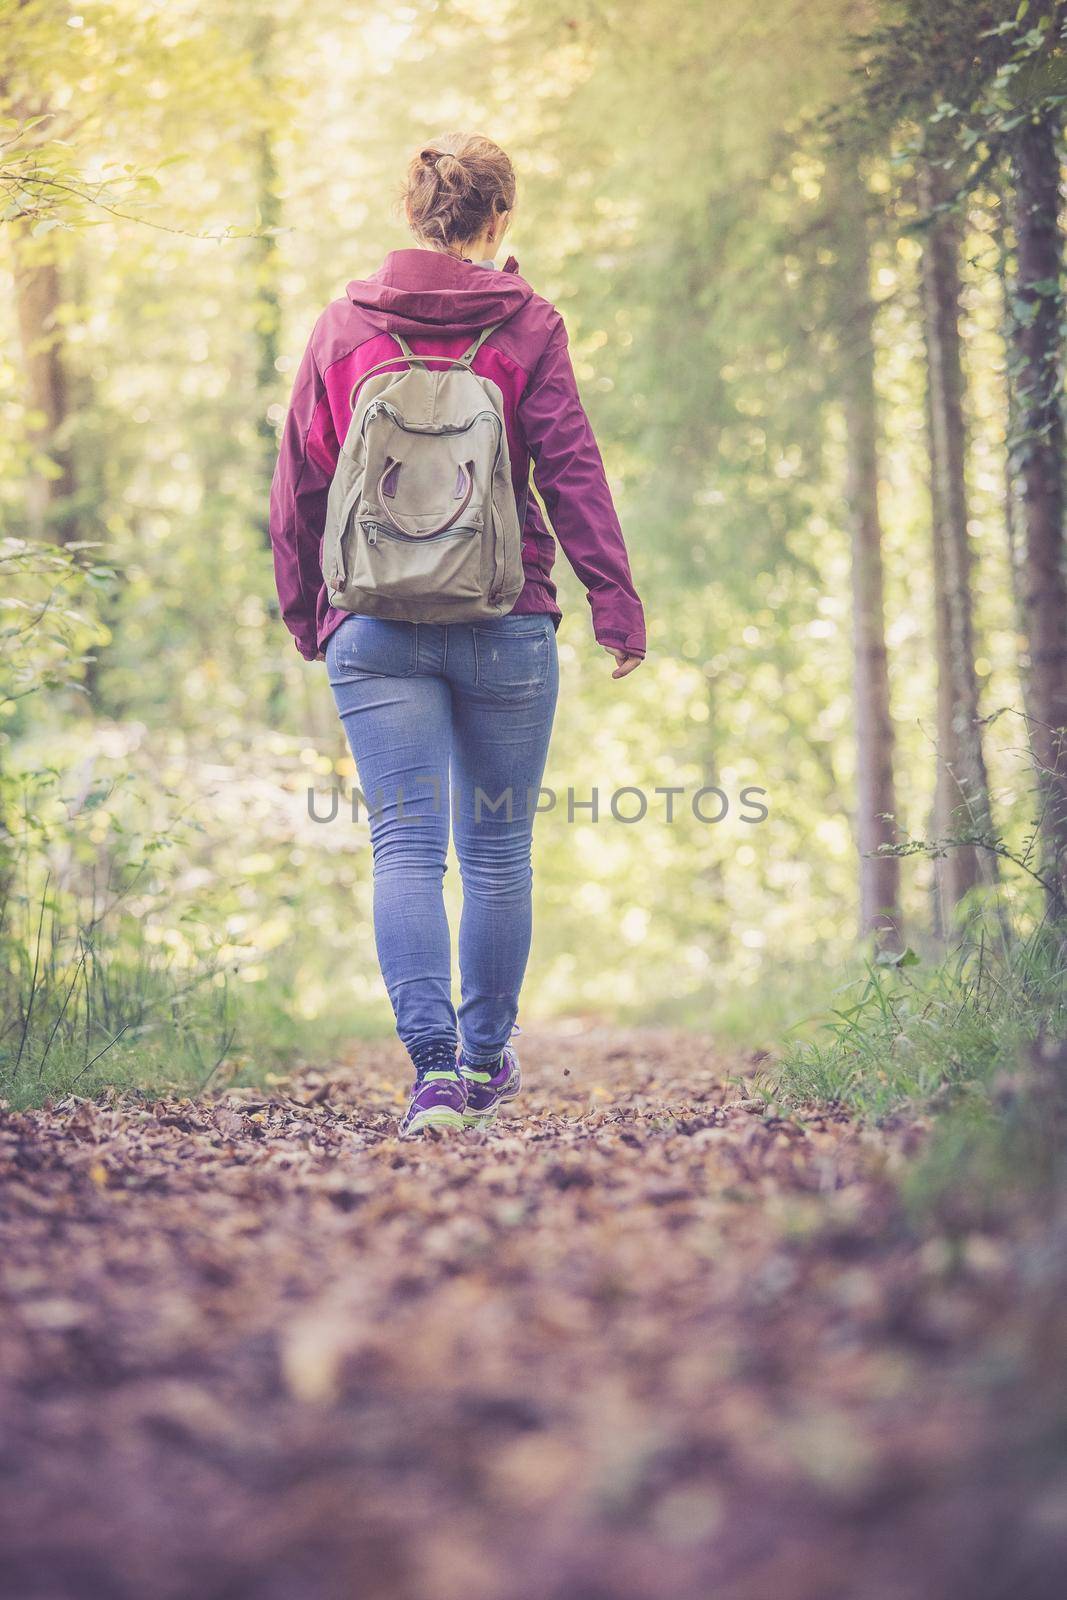 Get your mind free and forest therapy concept: Young girl is hiking through the green forest by Daxenbichler